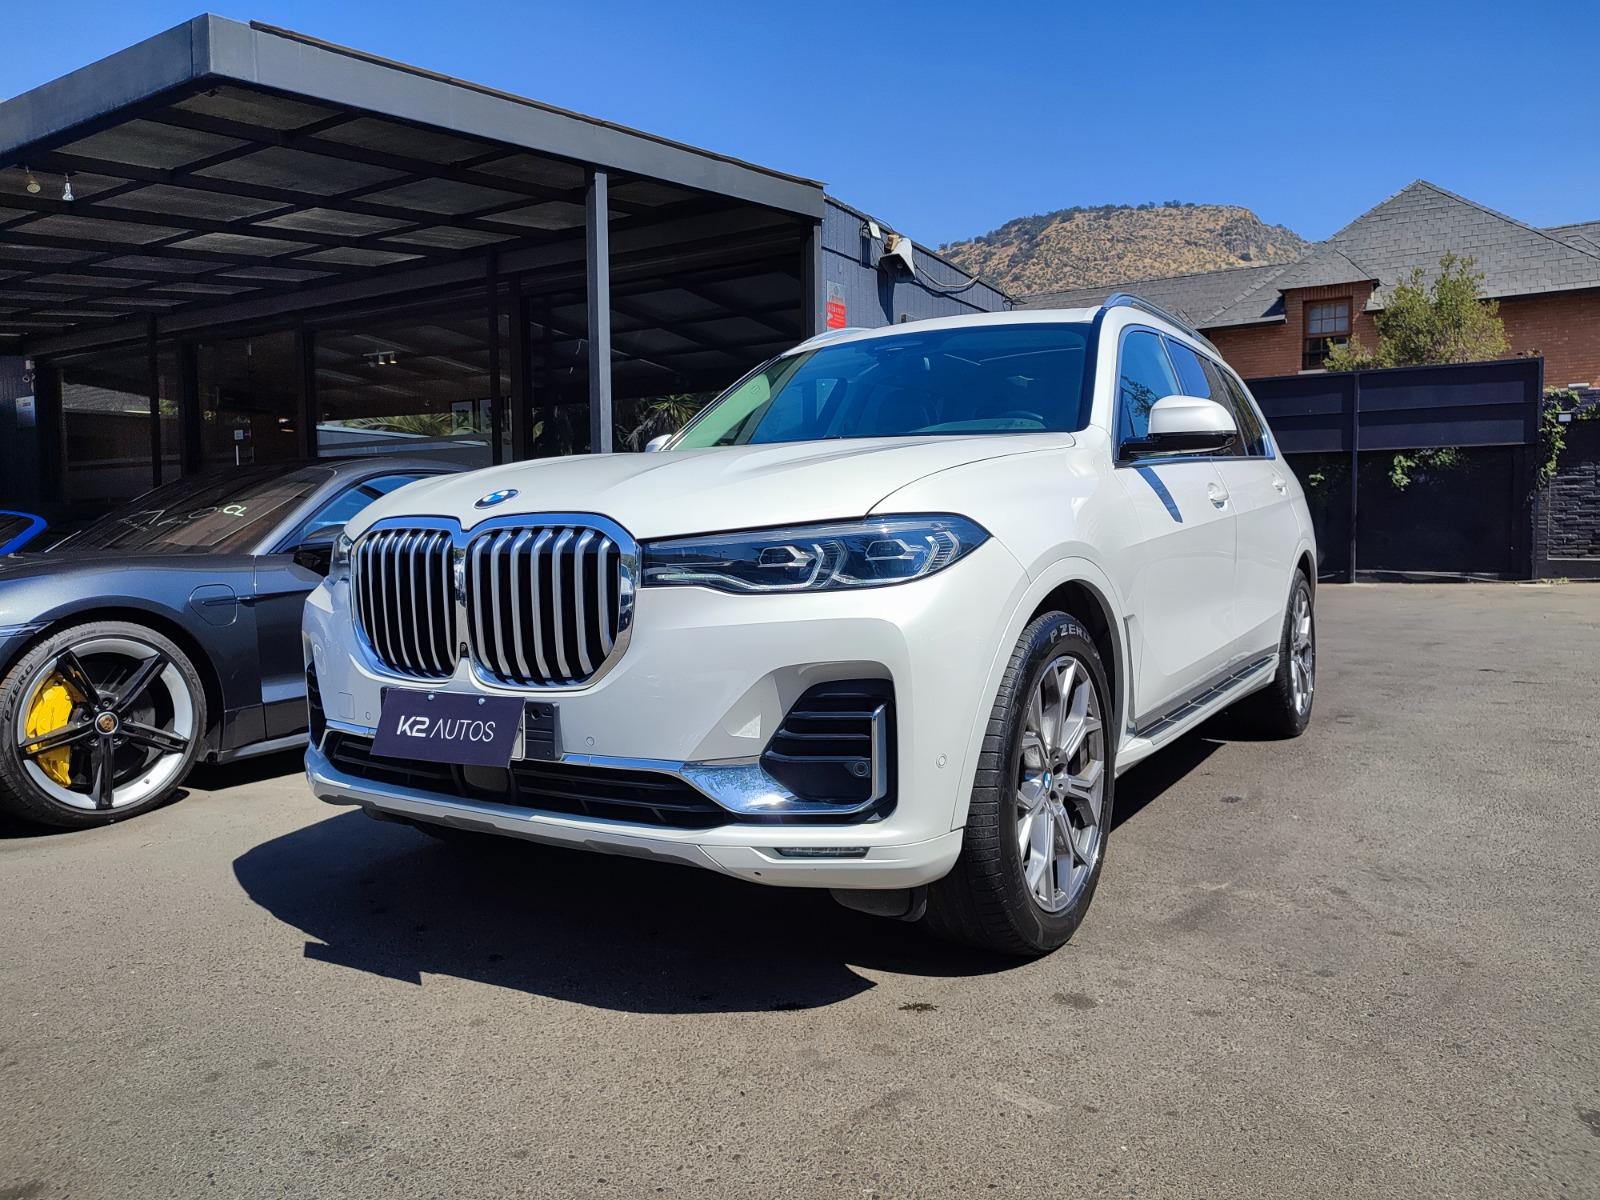 BMW X7 XDRIVE 40i M 2020 MAXIMO EQUIPO, IMPECABLE - FULL MOTOR